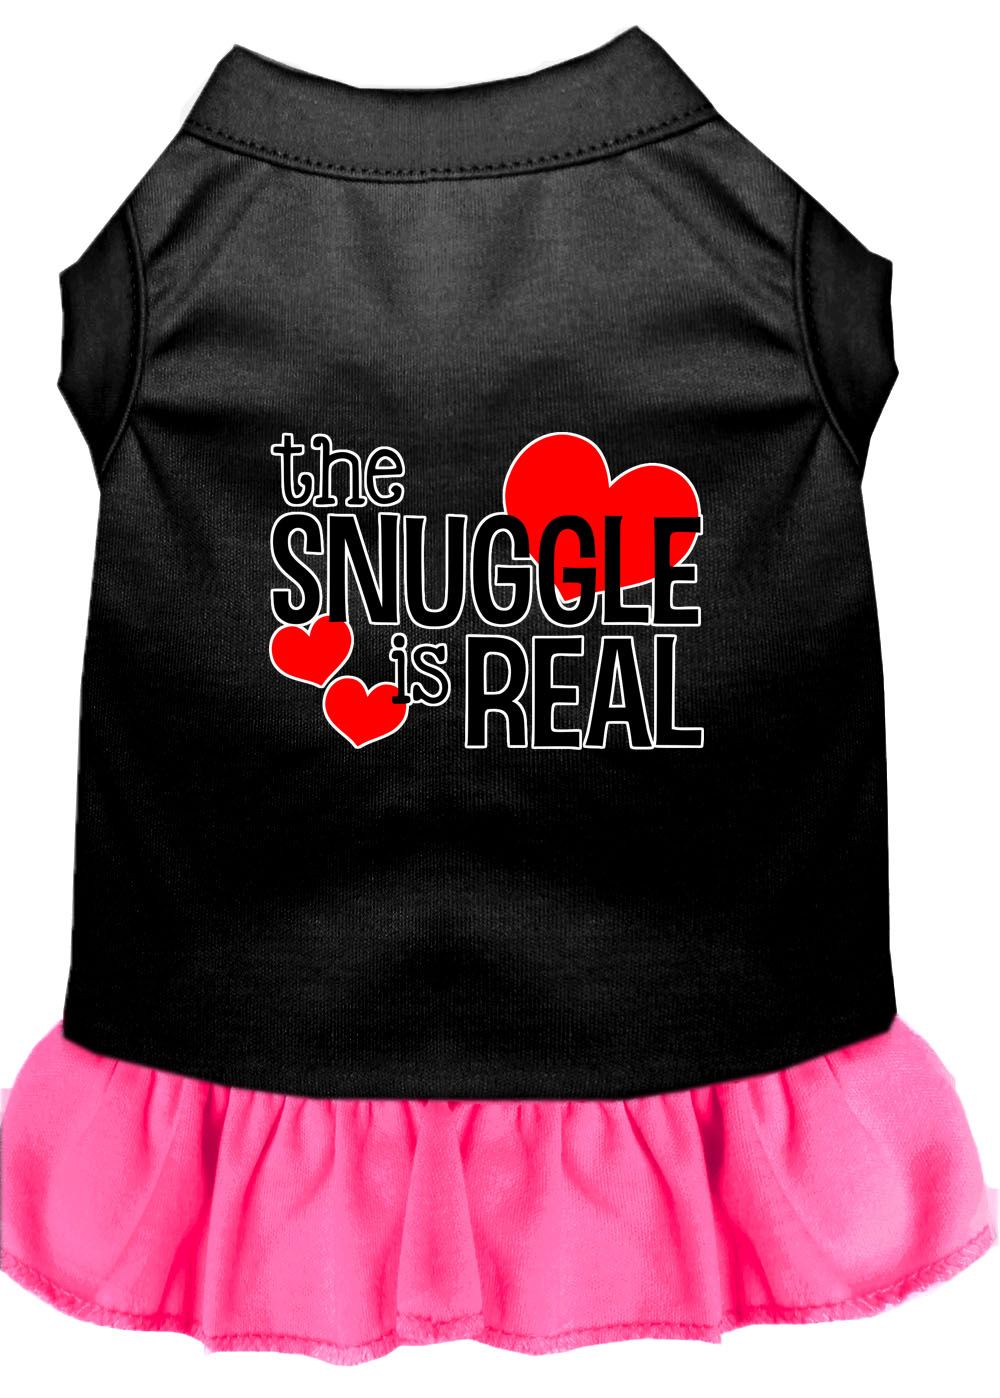 The Snuggle is Real Screen Print Dog Dress Black with Bright Pink XL